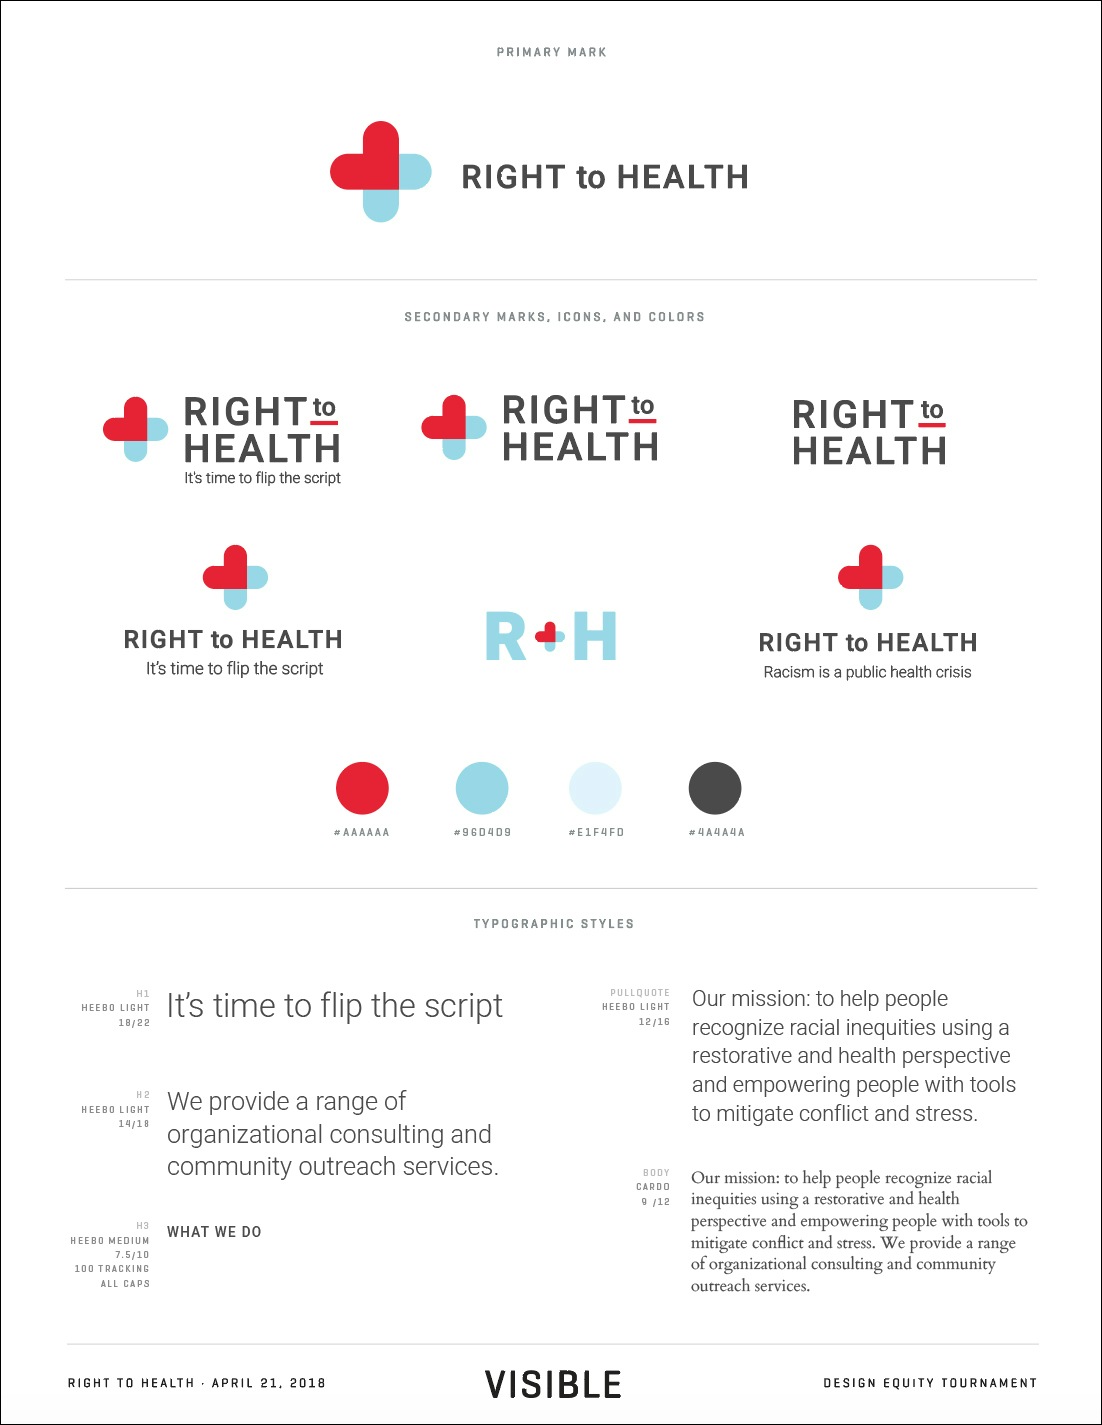 Right to Health marks, icons and colors. 